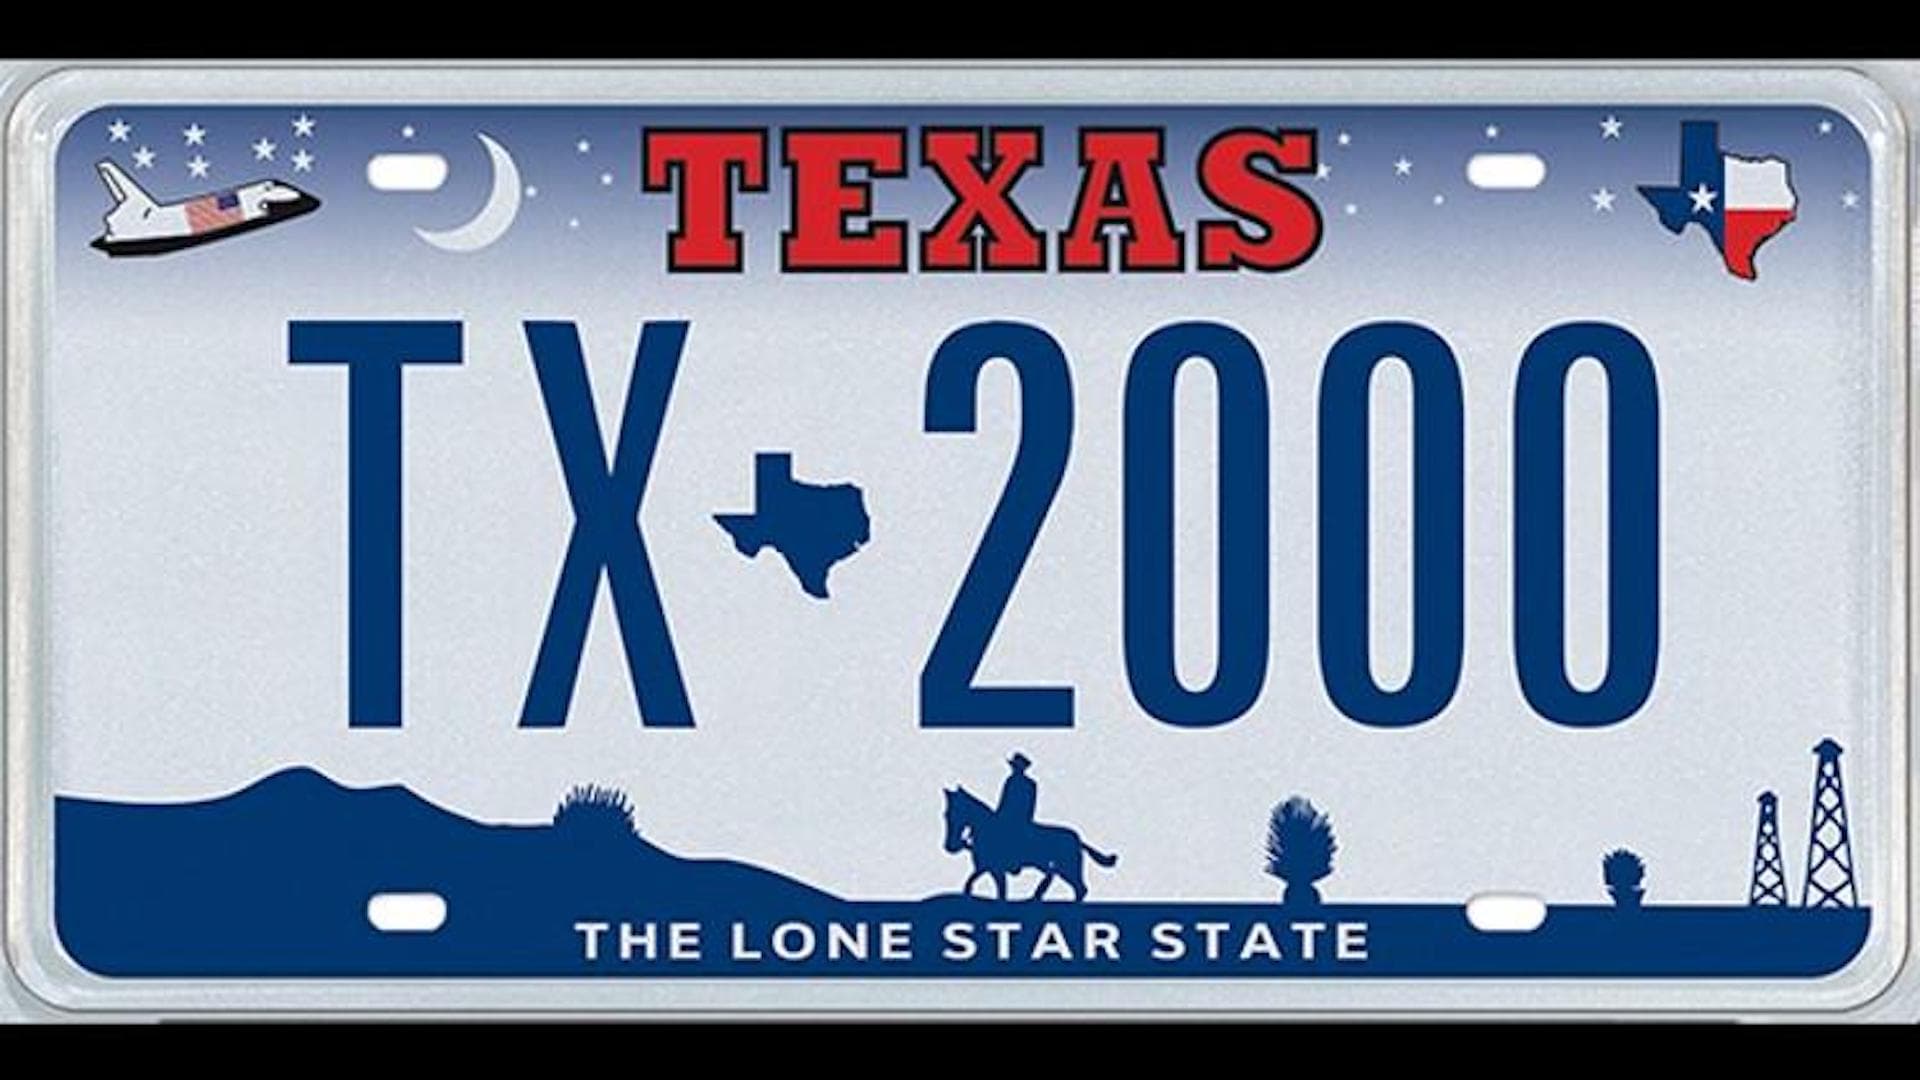 What US State Has the Best Looking License Plate?